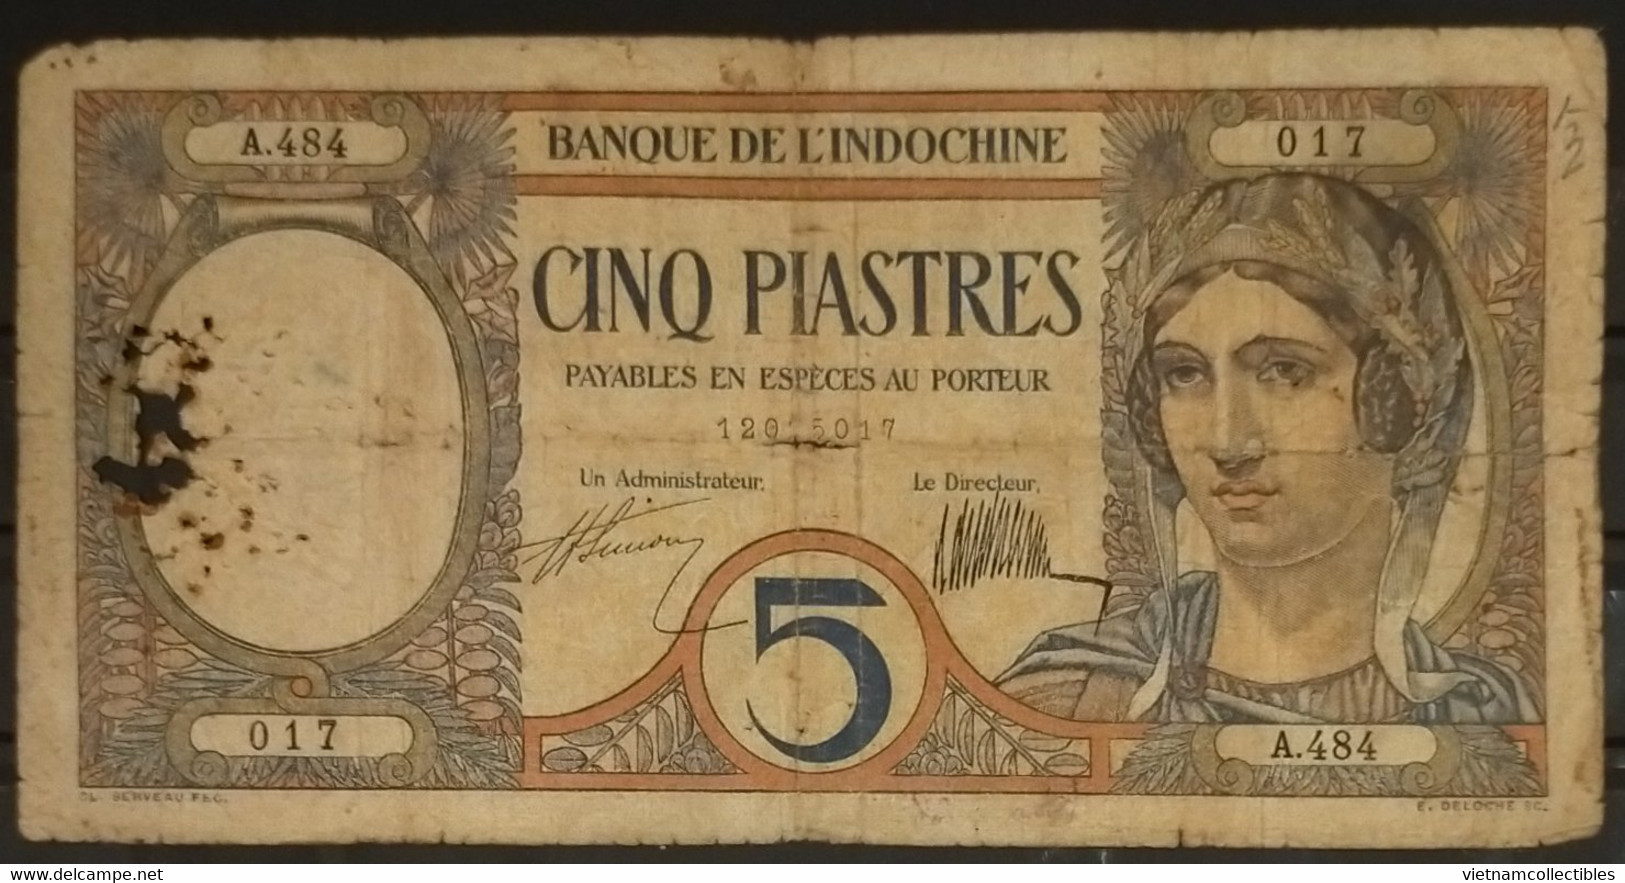 French Indochina Indo China Indochine Laos Vietnam Cambodia 5 Piastres VG Banknote Note 1927-31 - Pick # 49a / 2 Photos - Indochina